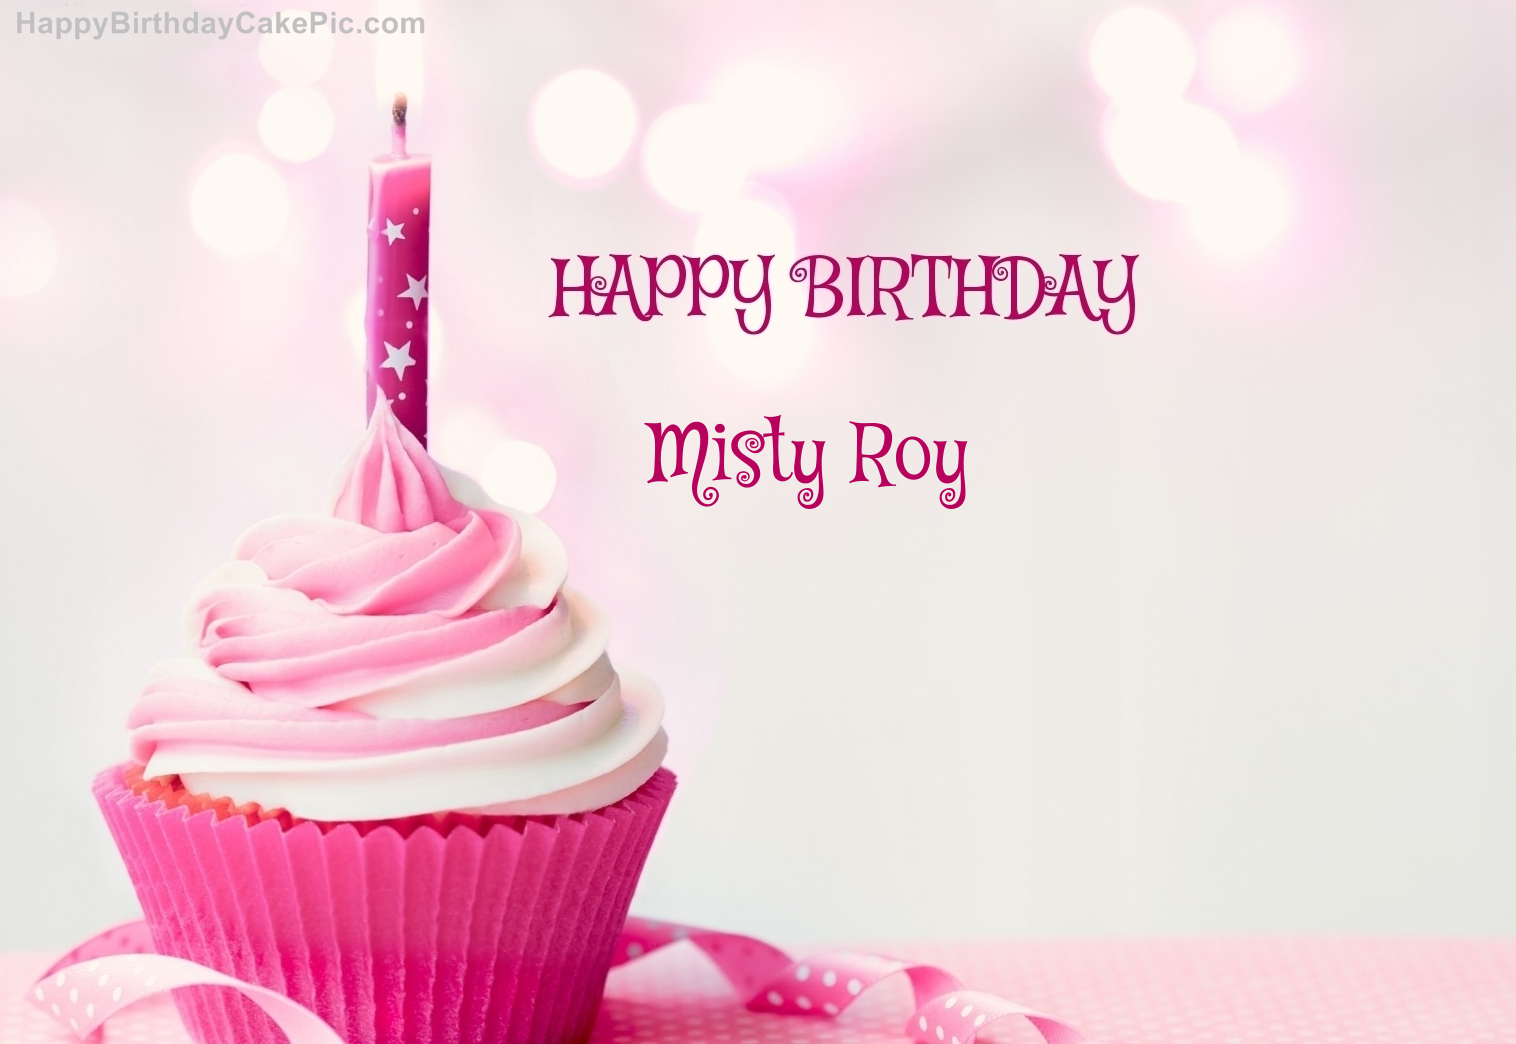 Happy Birthday Cupcake Candle Pink Cake For Misty Roy